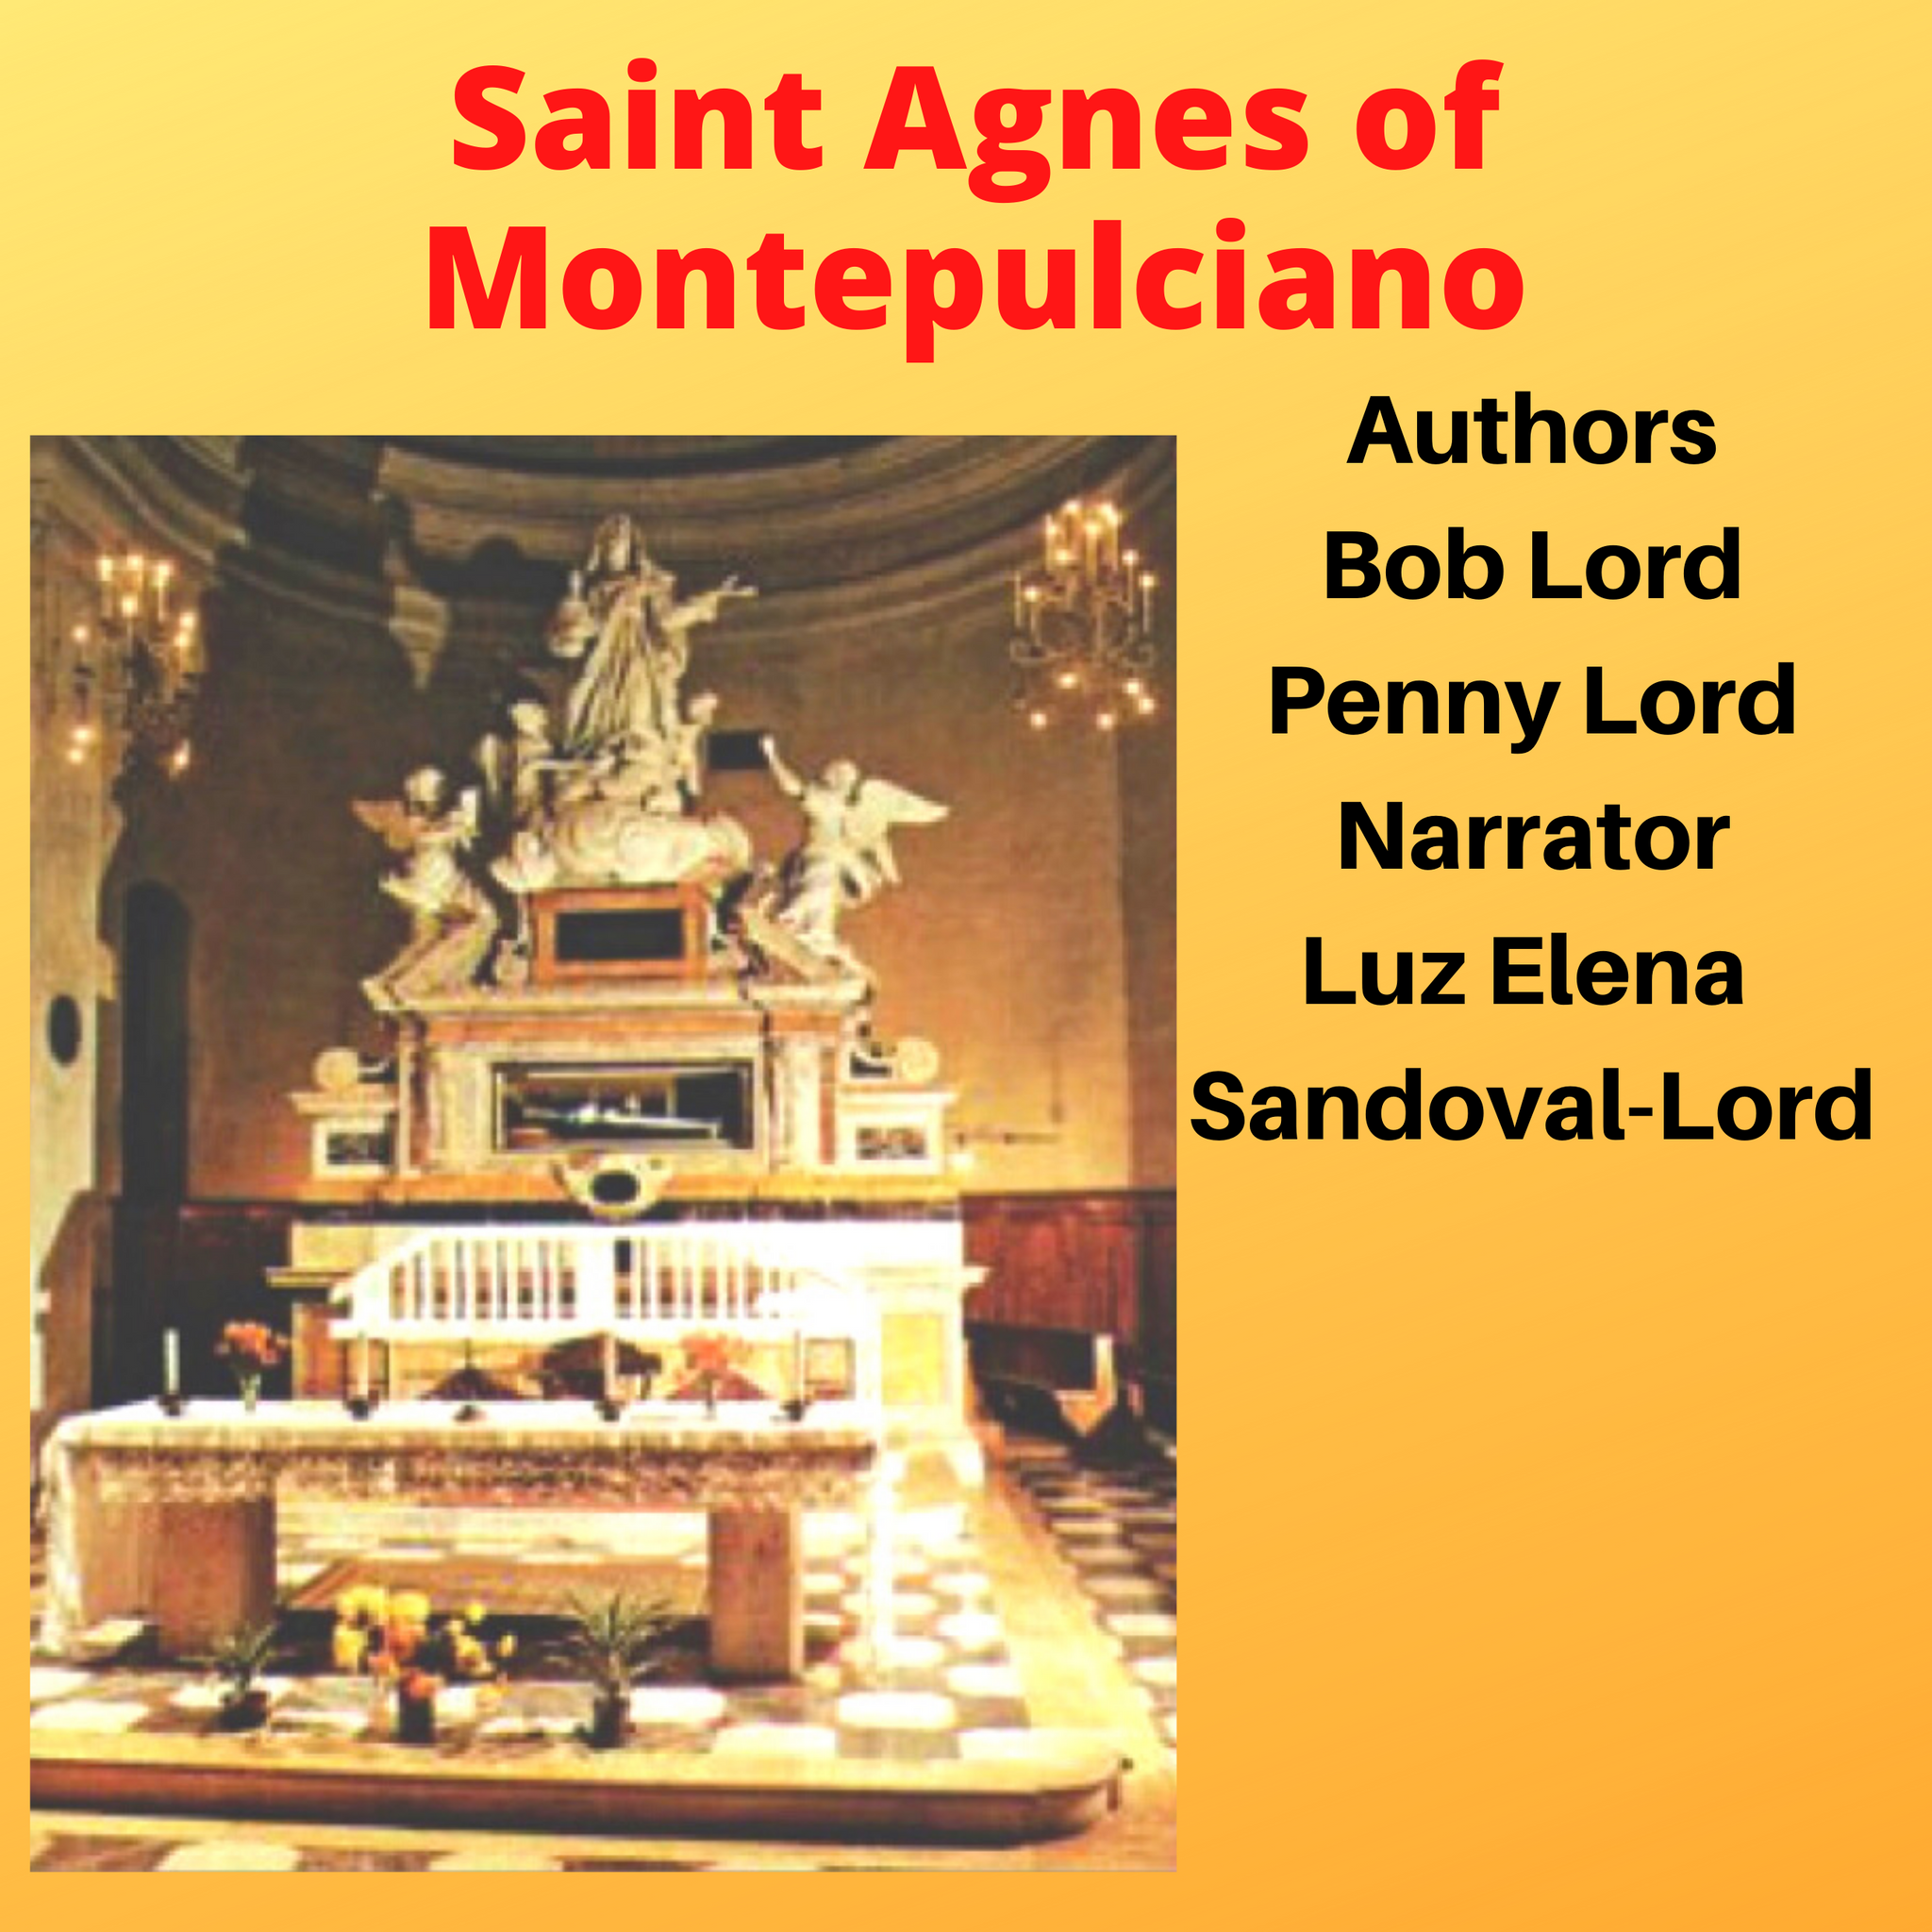 Saint Agnes of Multipulciano Audiobook - Bob and Penny Lord